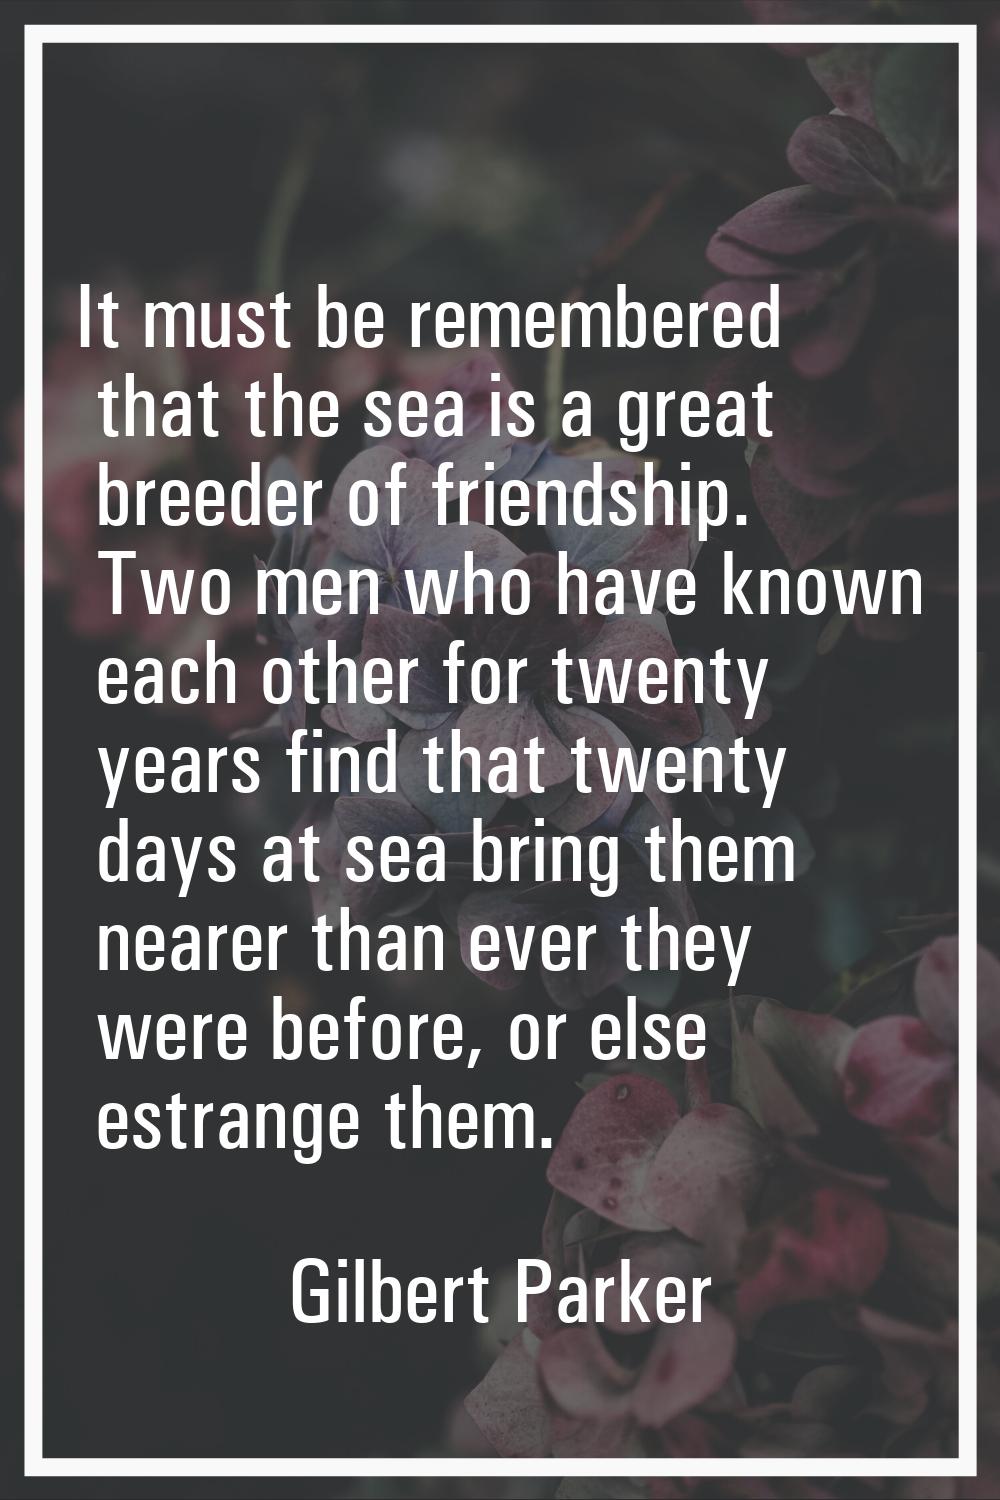 It must be remembered that the sea is a great breeder of friendship. Two men who have known each ot